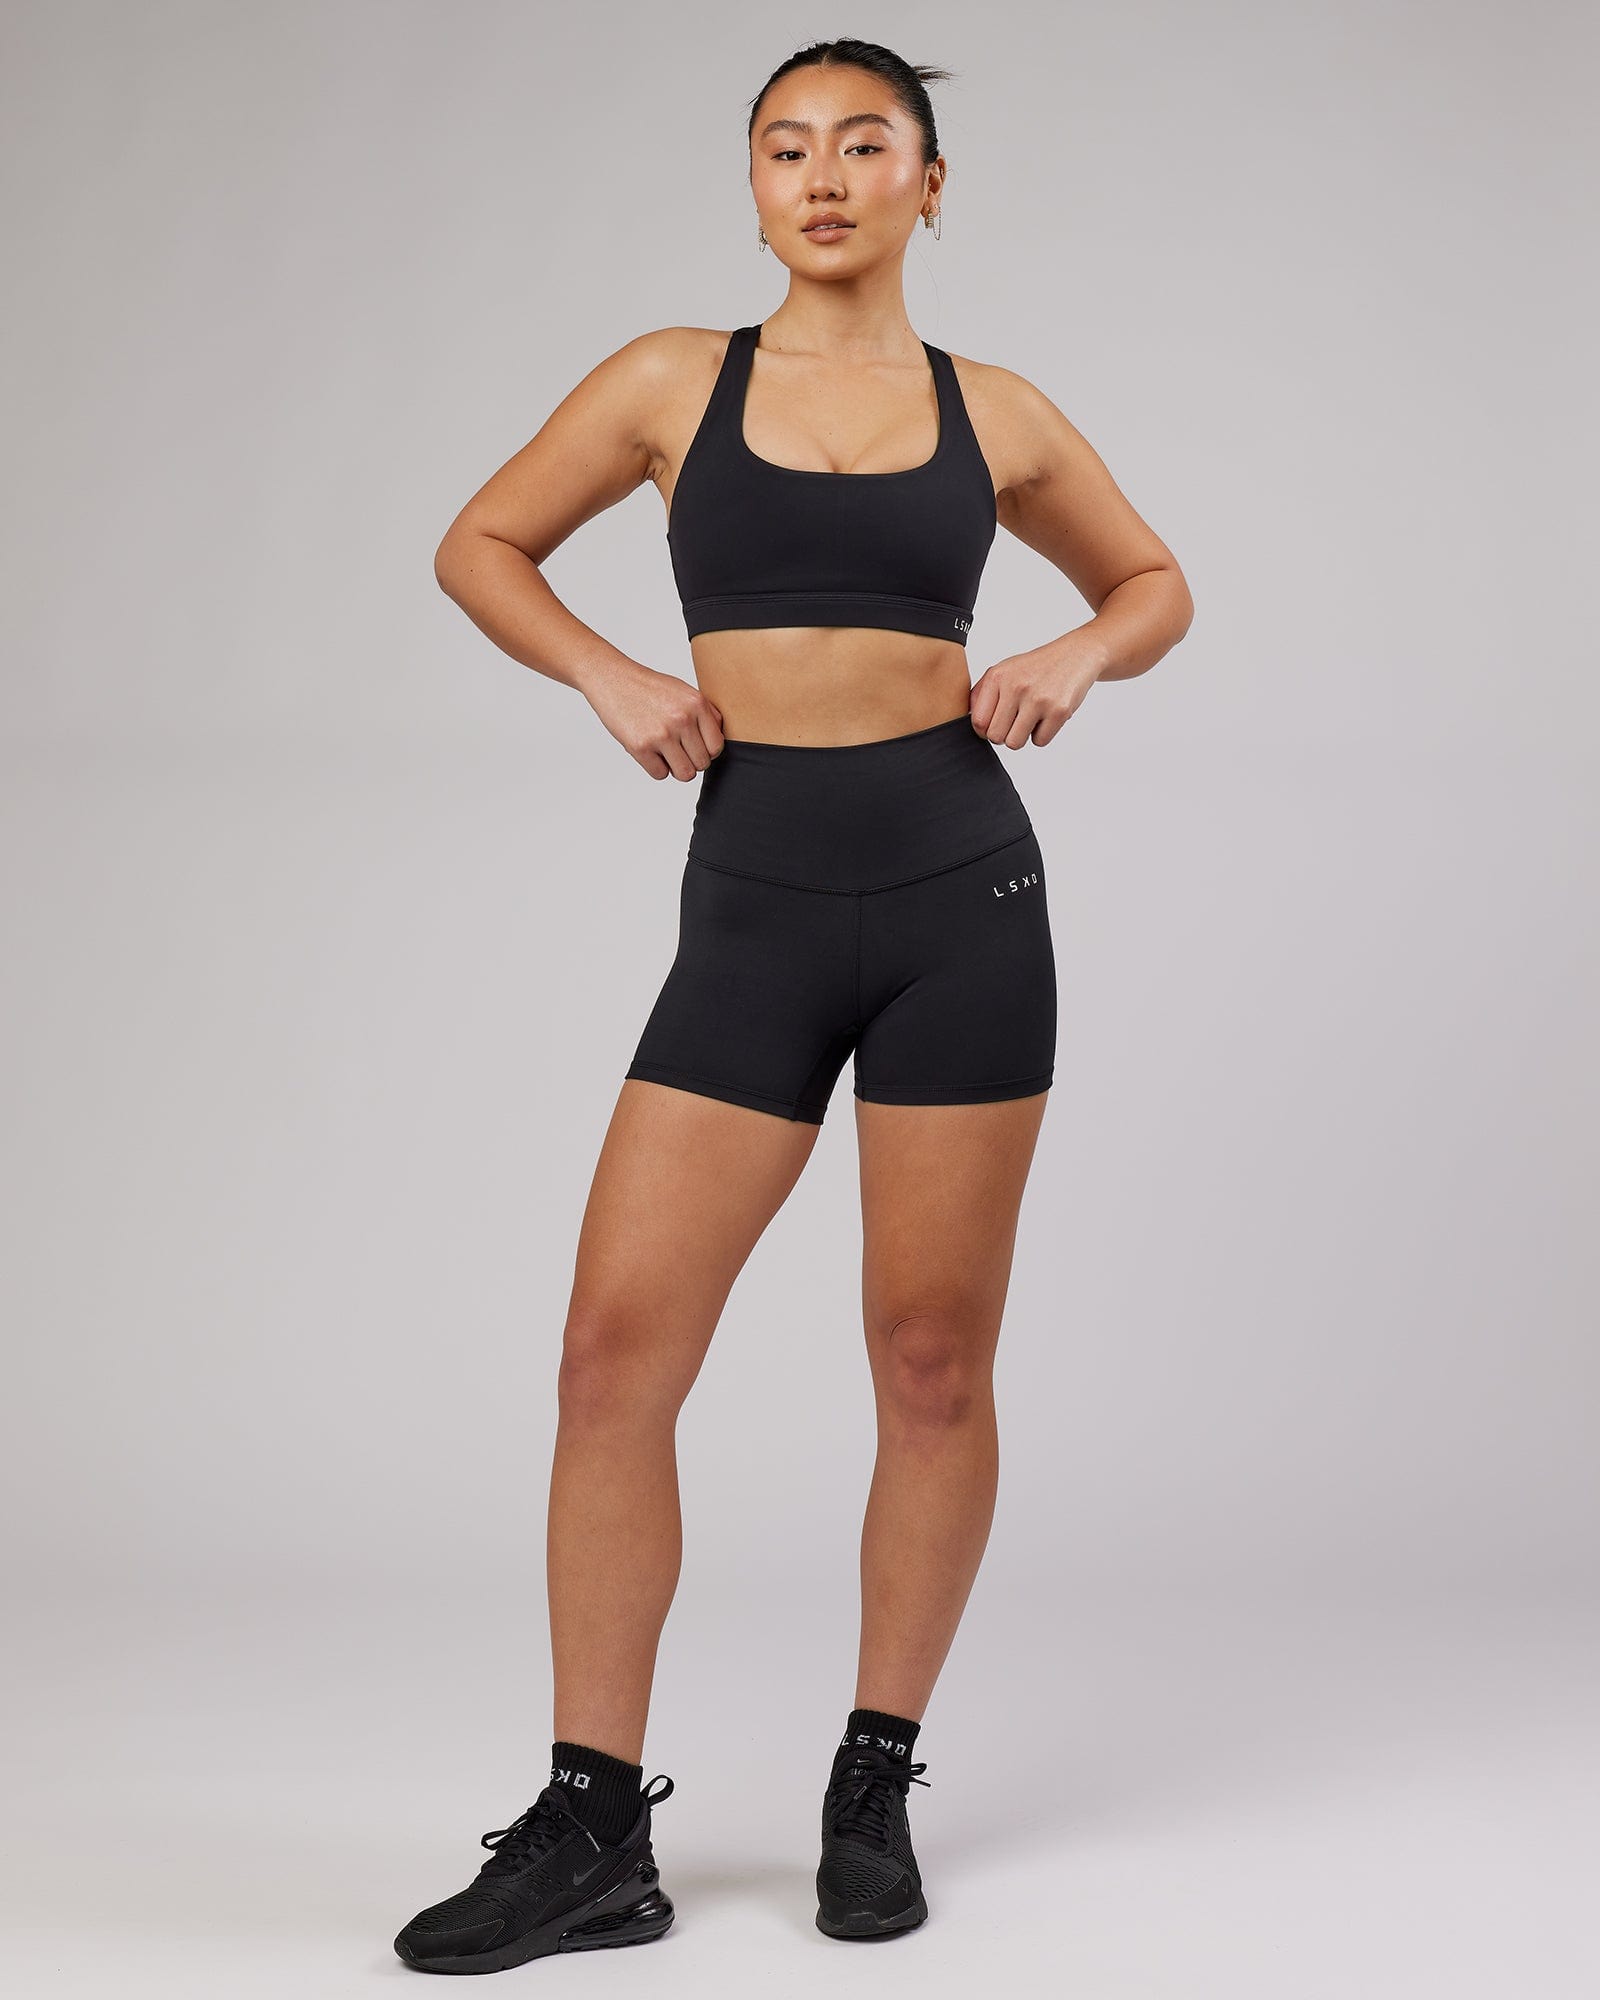 LSKD - Business in the front party out the back 🖤 Meet The Balance  Ribbed Sports Bra 〰 Compressive, comfy, confident. Shop Now 👇  lskd.co/collections/womens-sports-bra